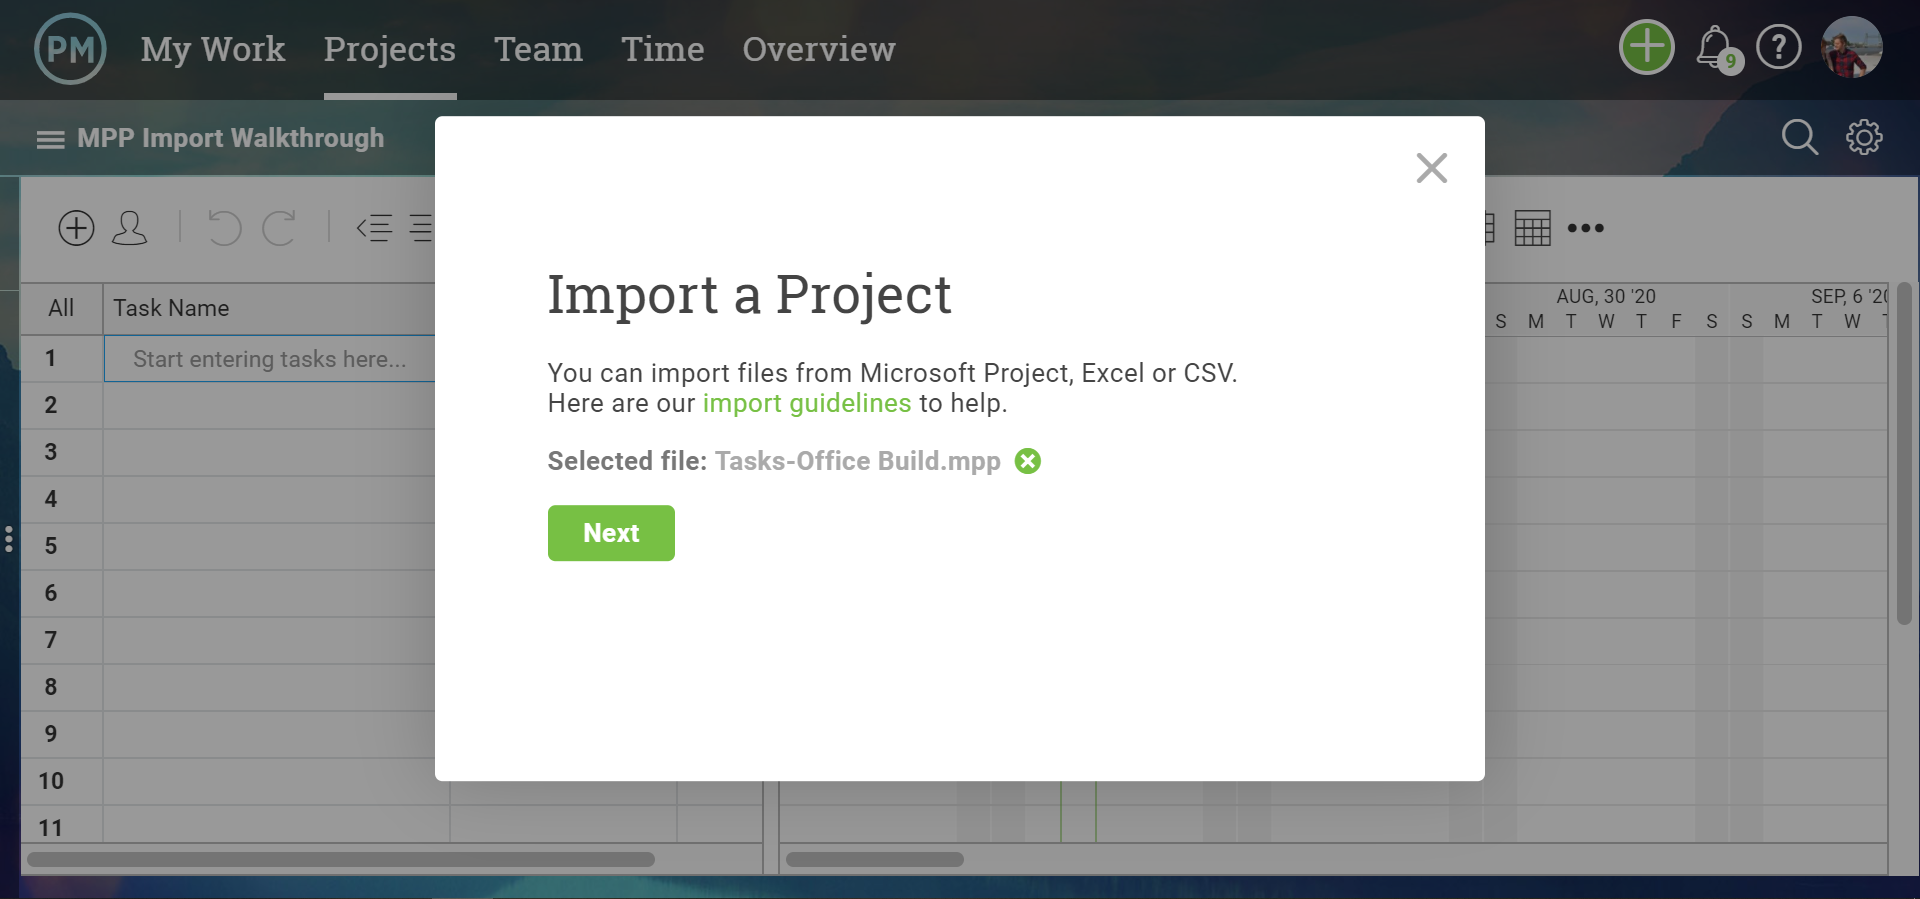 Choose a Microsoft Project file to import into ProjectManager.com so you can manage it on your Mac